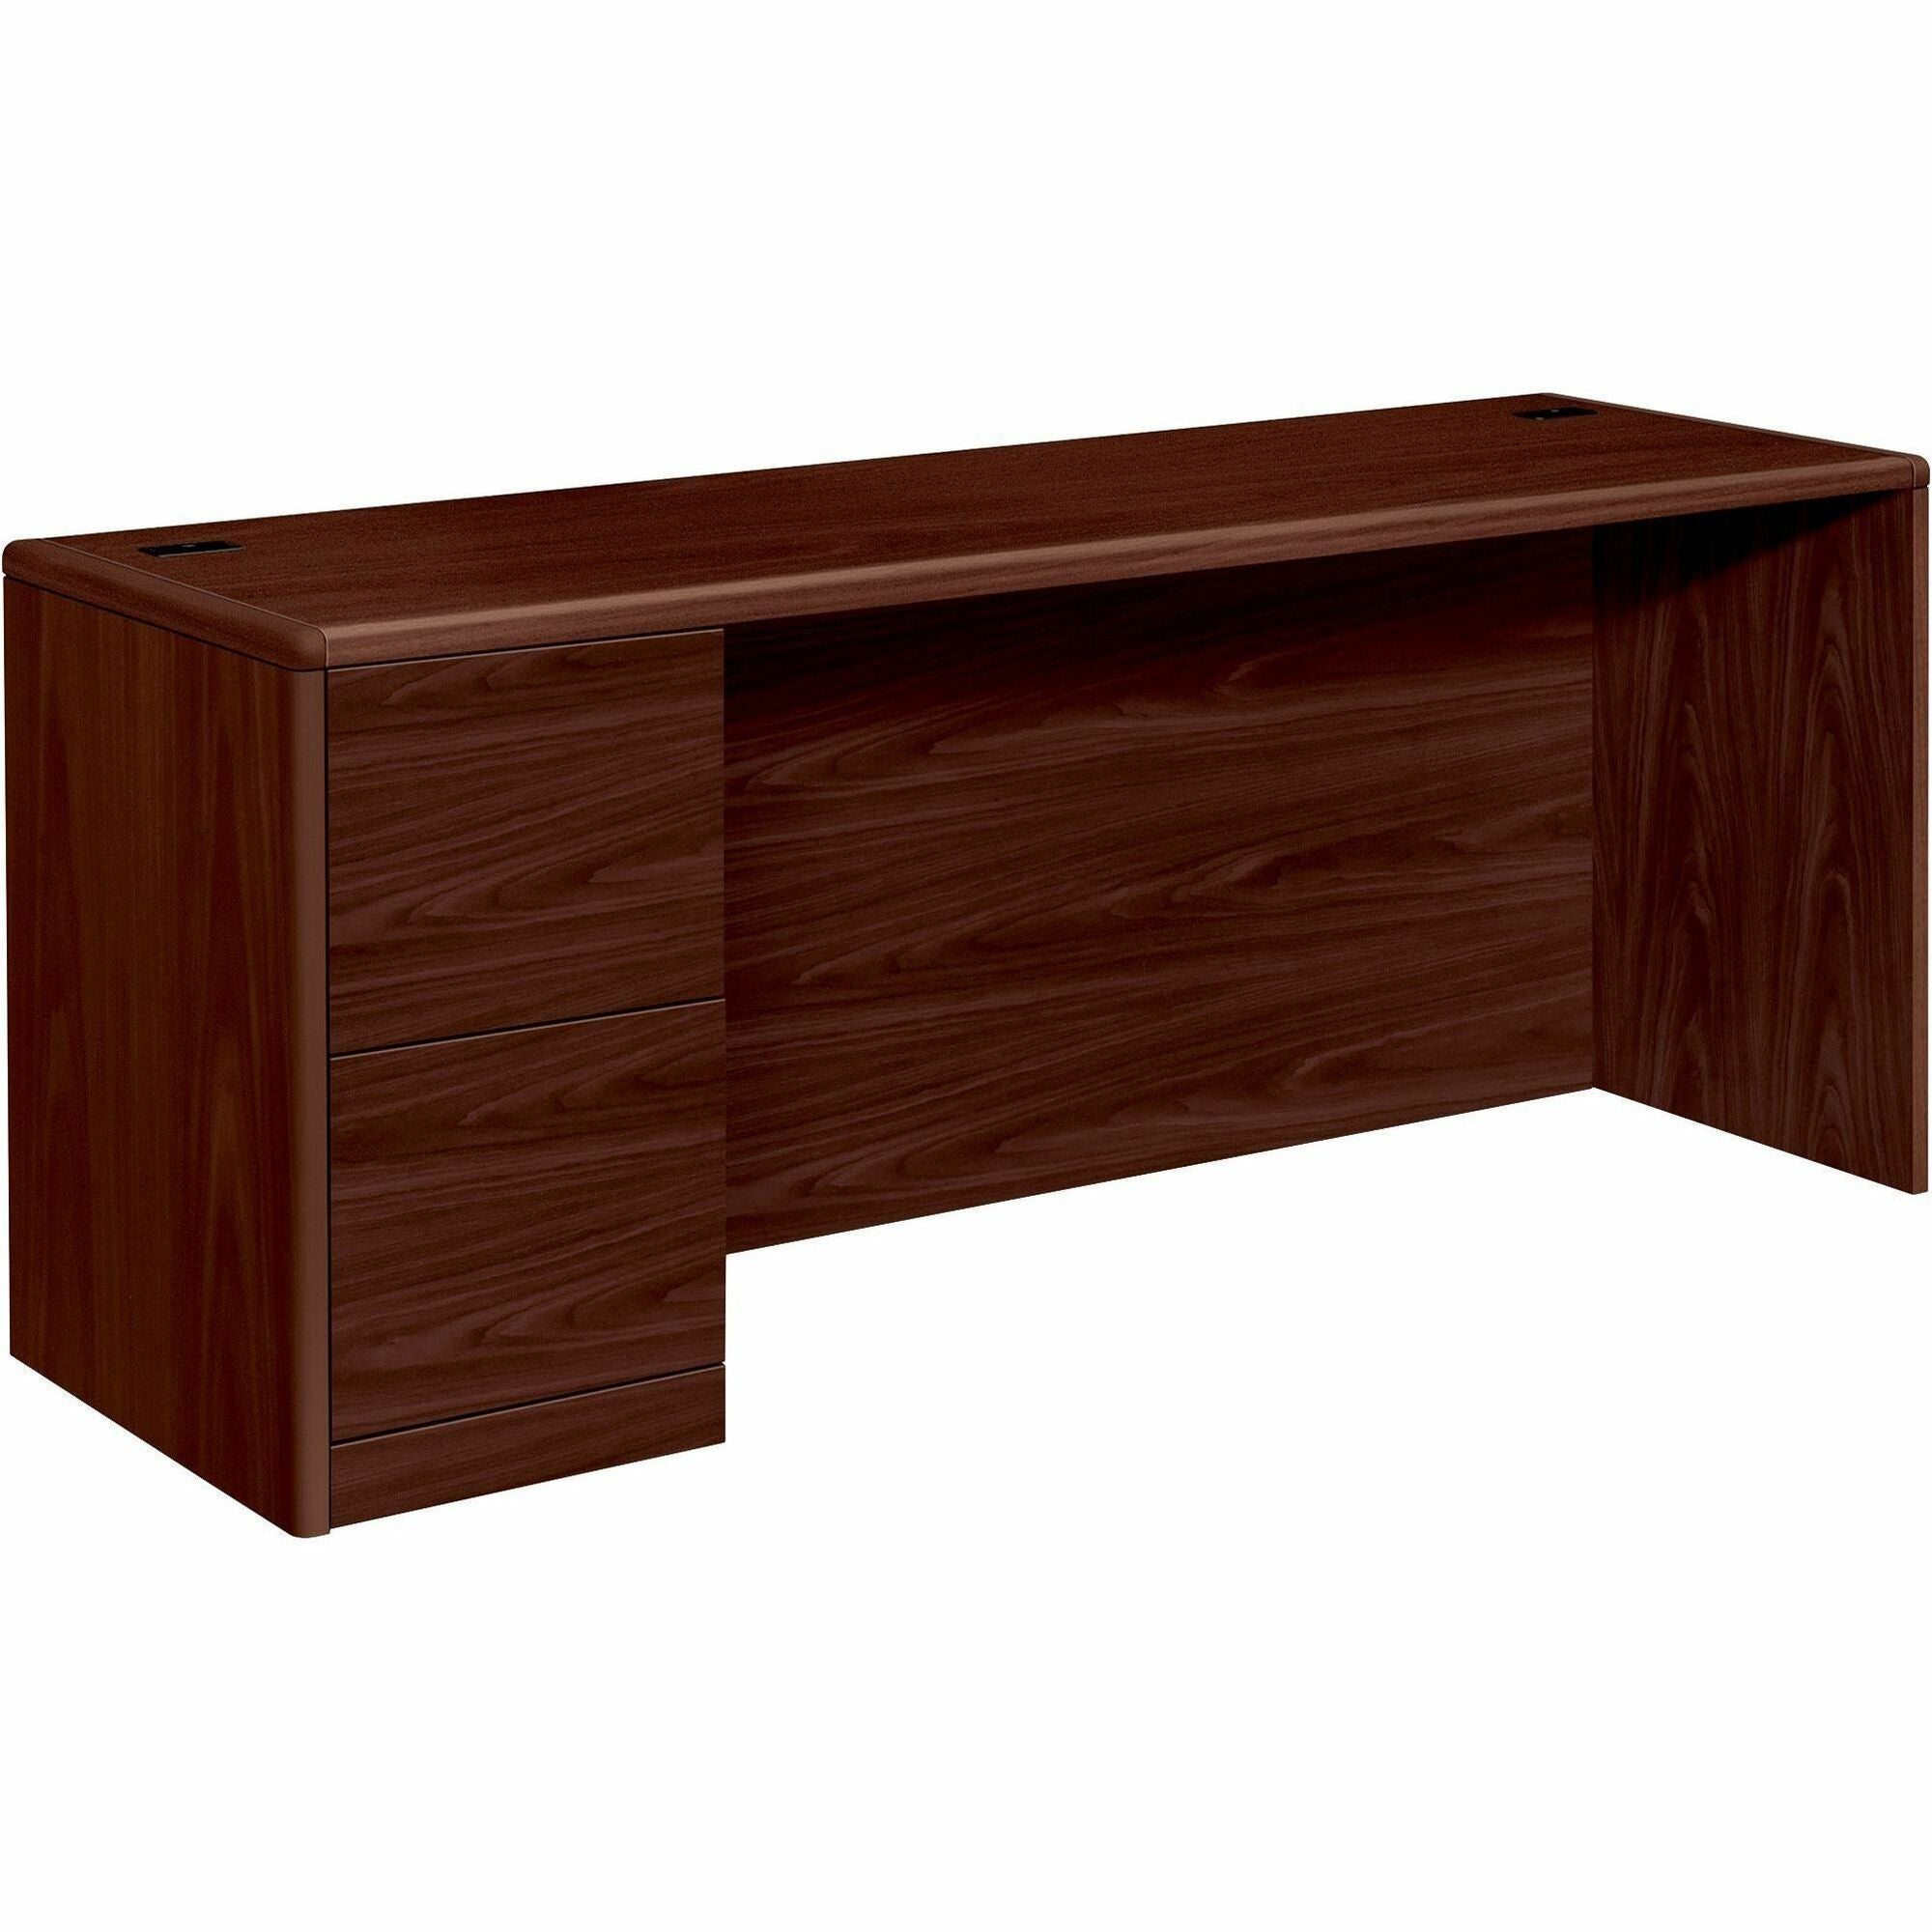 HON 10700 H10708L Pedestal Credenza - 72" x 24"29.5" - 2 x File Drawer(s)Left Side - Waterfall Edge - Finish: Mahogany - 